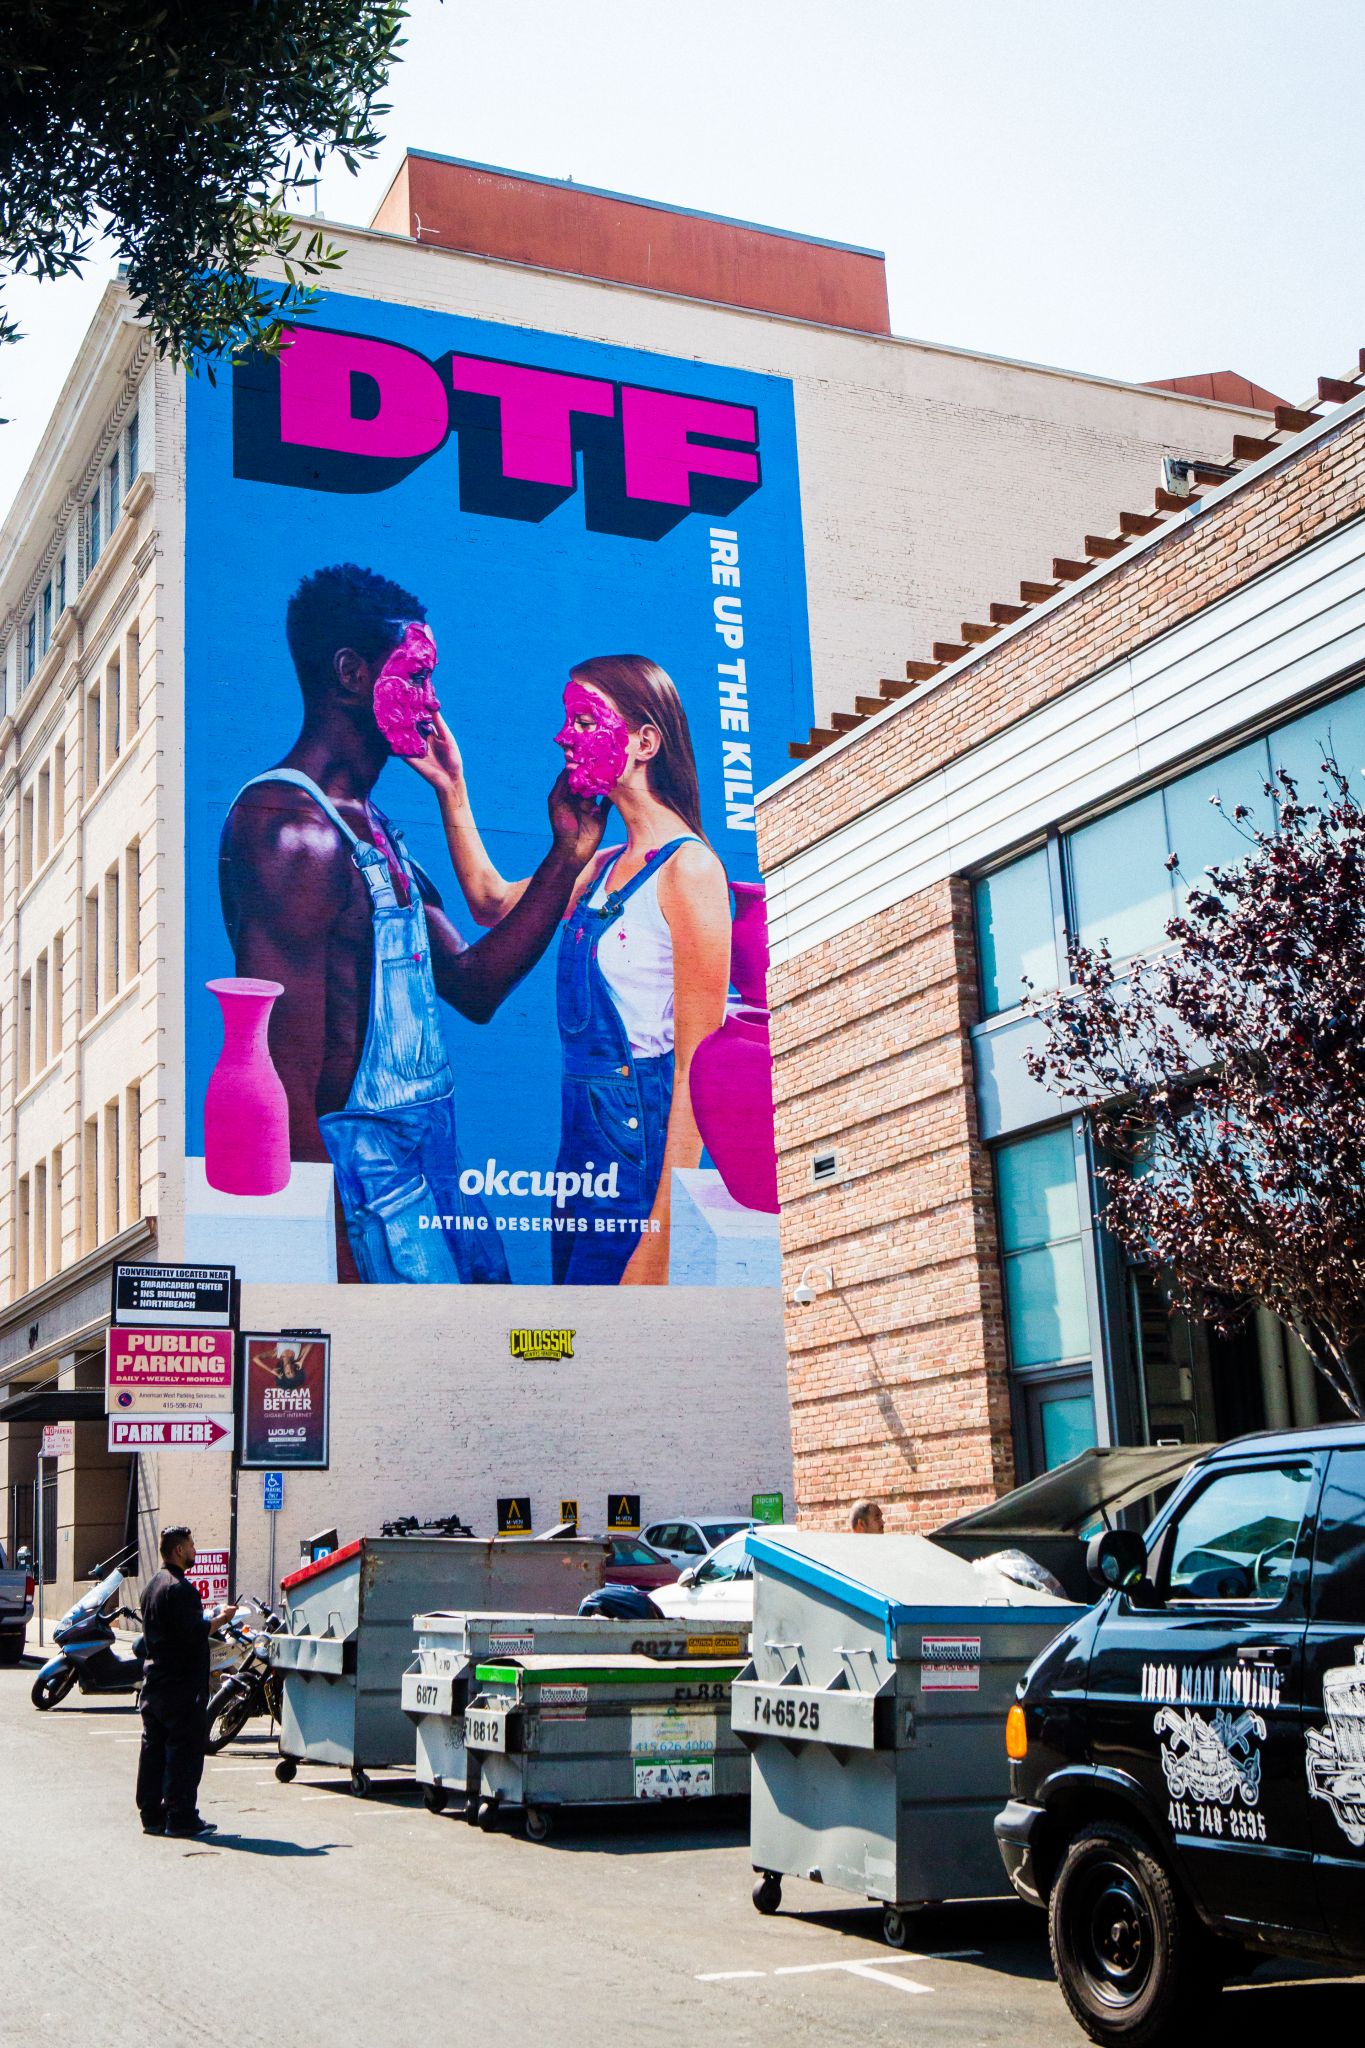 More images from our DTF campaign revealed, by OkCupid